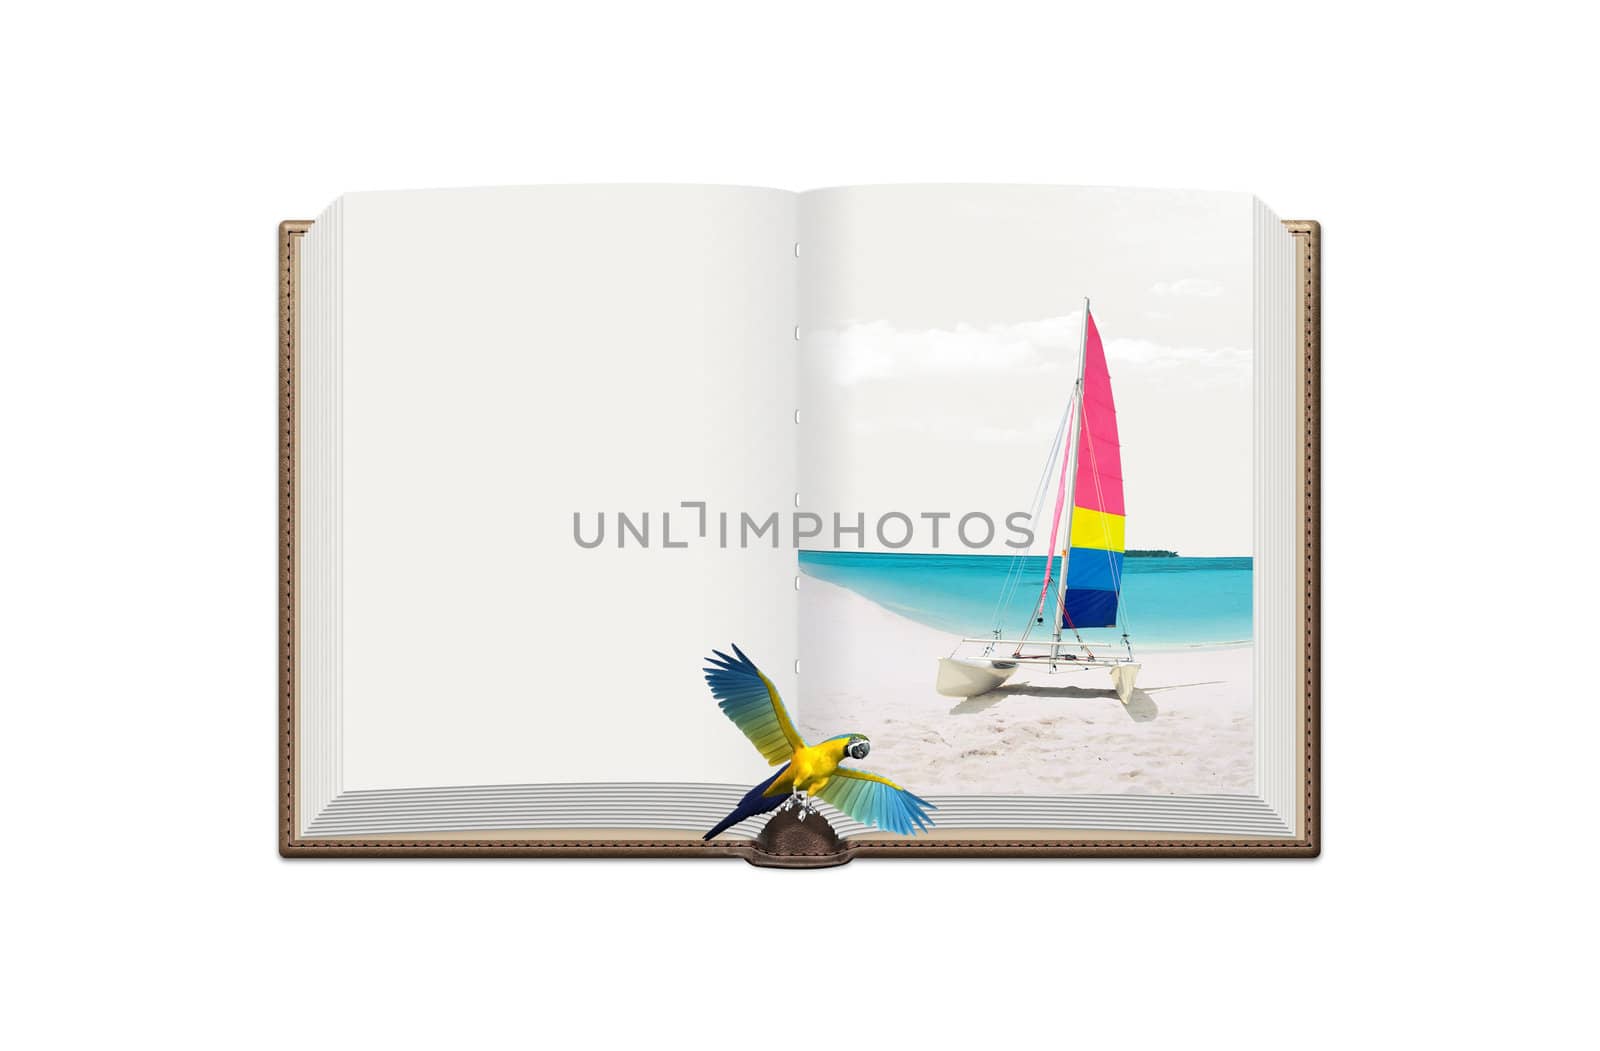 Book with photo and parrot on isolated background